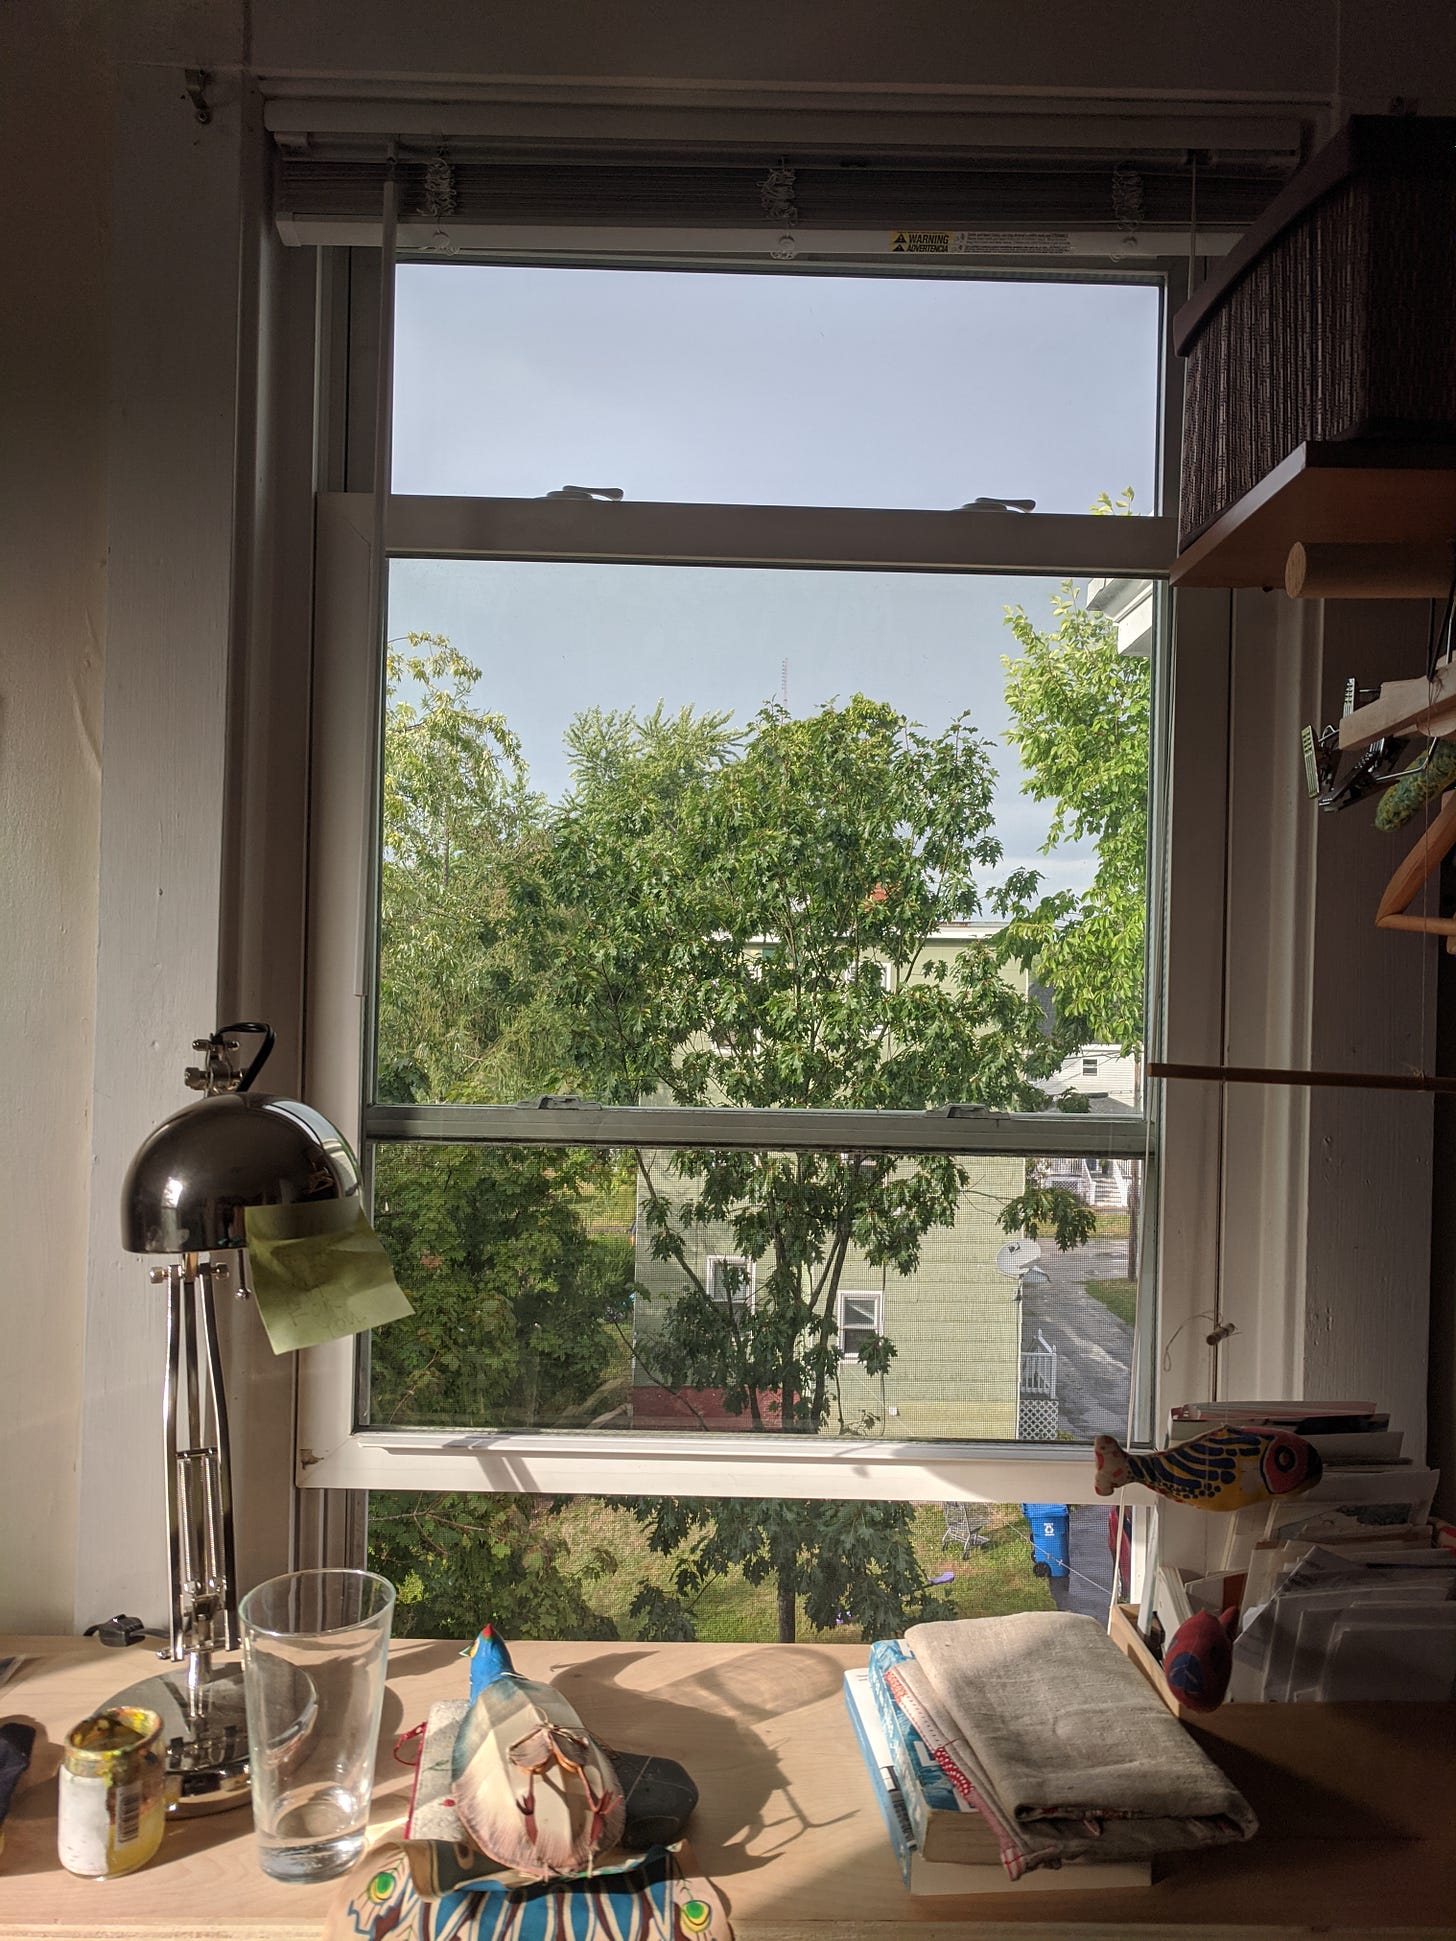 An open window in front of which there is a desk with bits and pieces of household things on it.